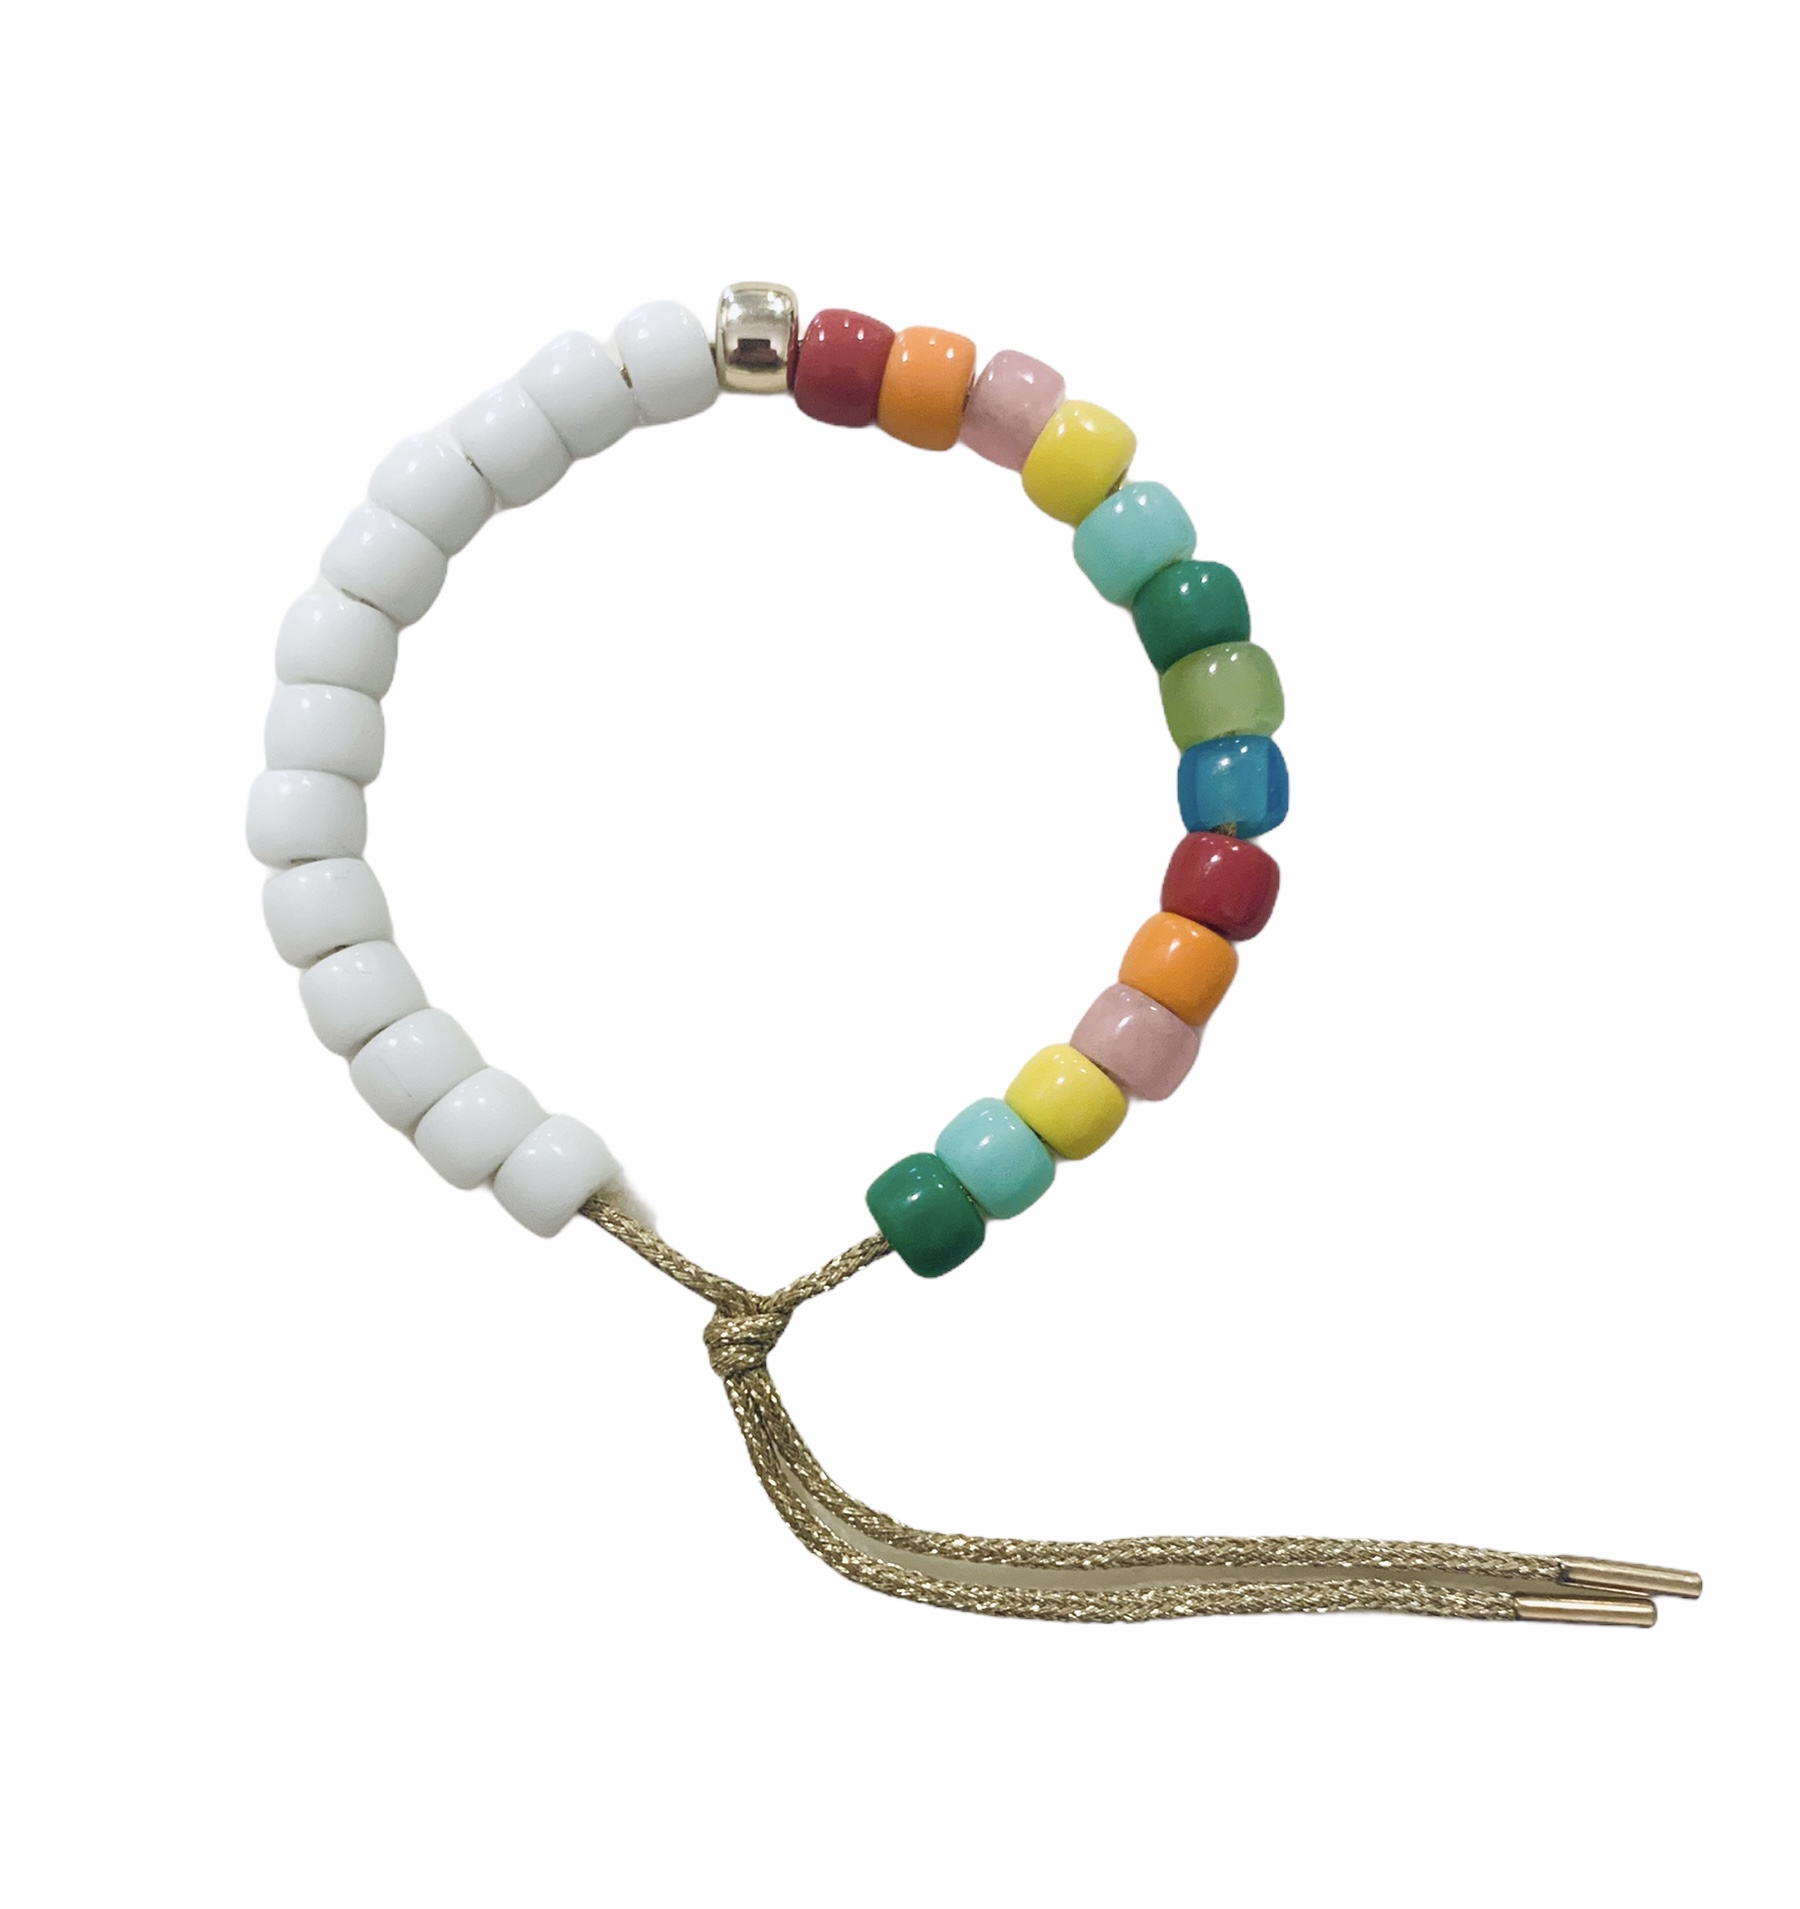 Custom Stone Bracelet Made with Natural Healing Stones, Beads and More –  MaeMae Jewelry